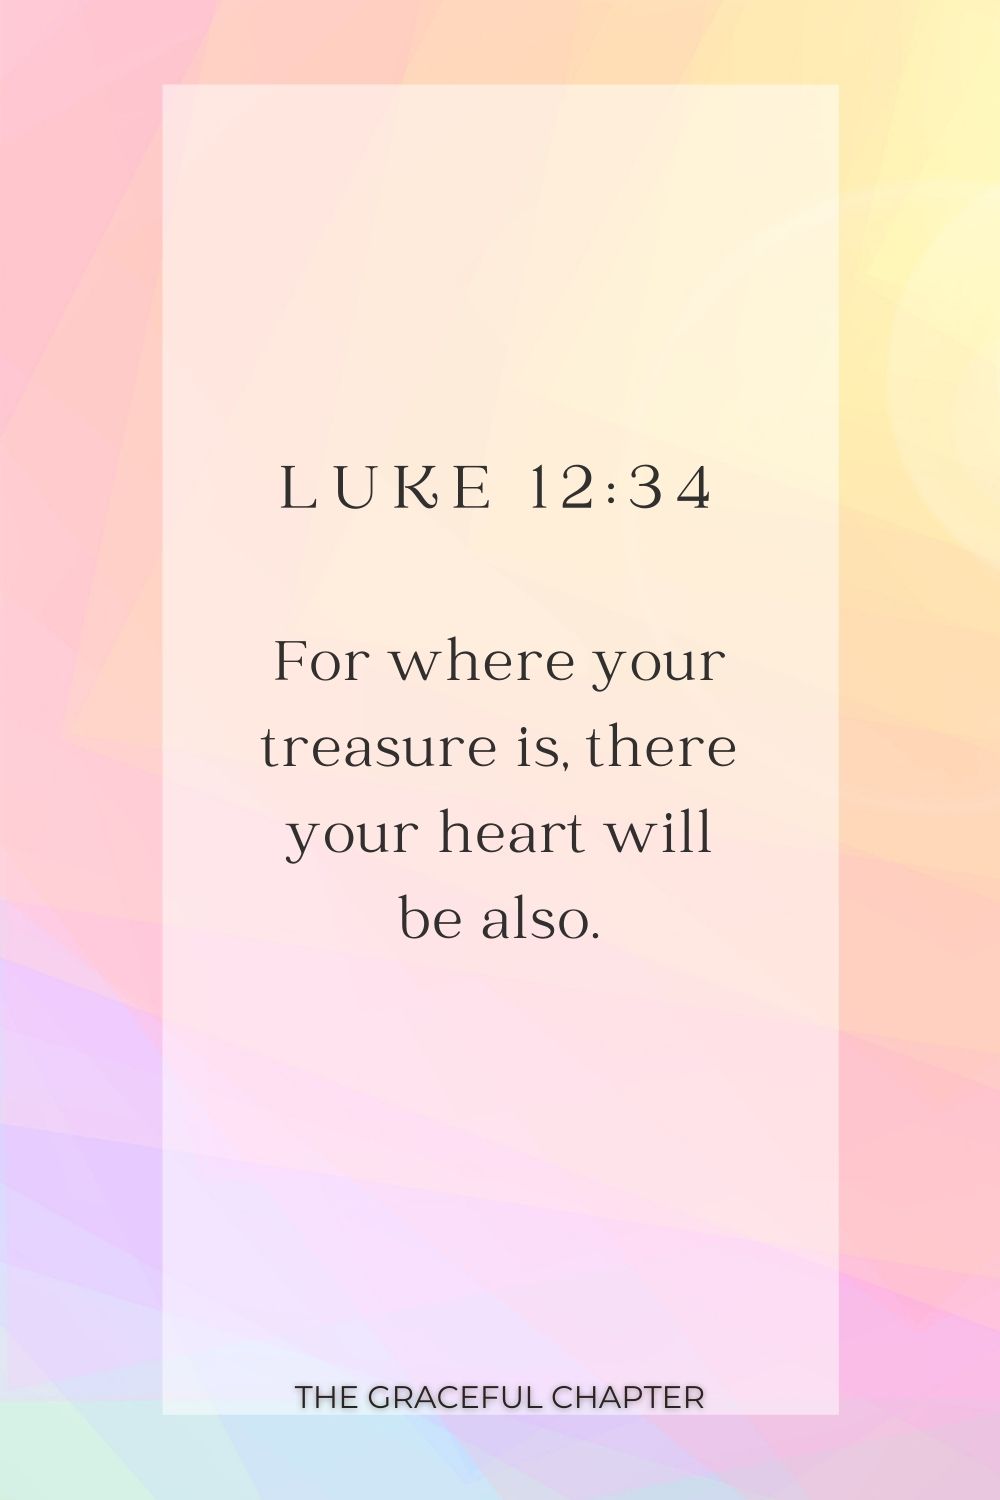 For where your treasure is, there your heart will be also. Luke 12:34